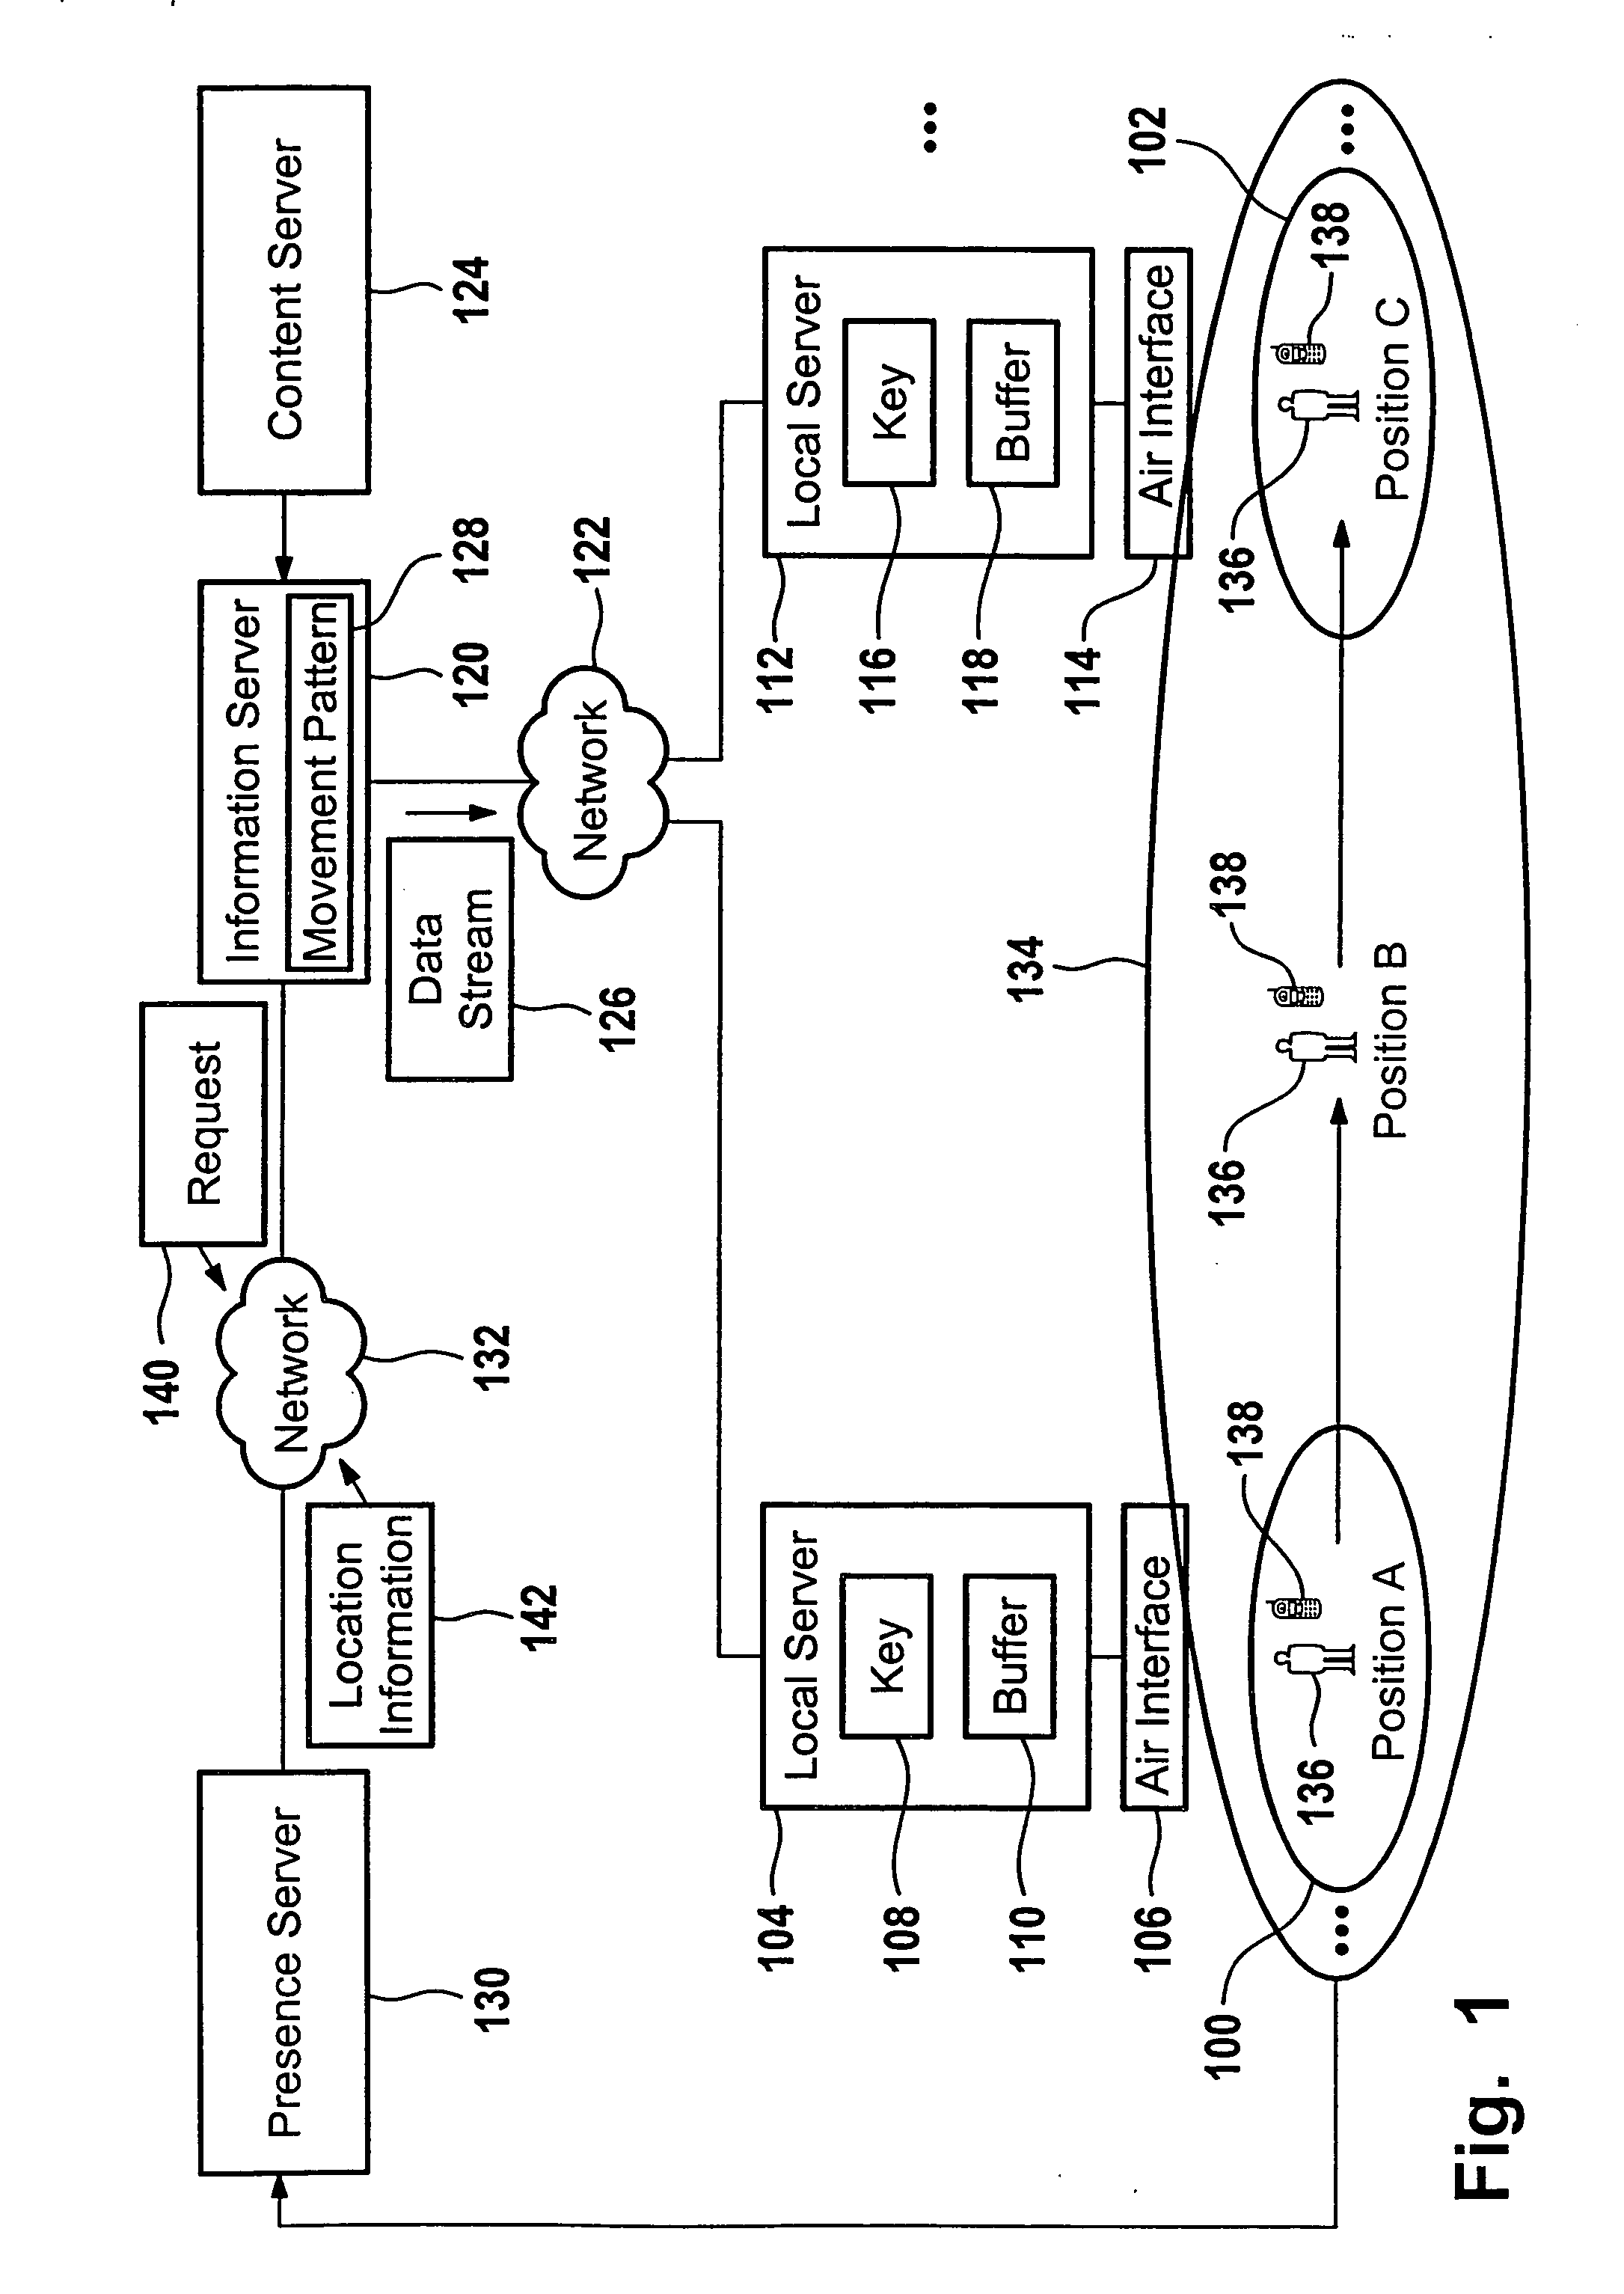 Communication method and telecommunication network for providing a data stream to a mobile terminal